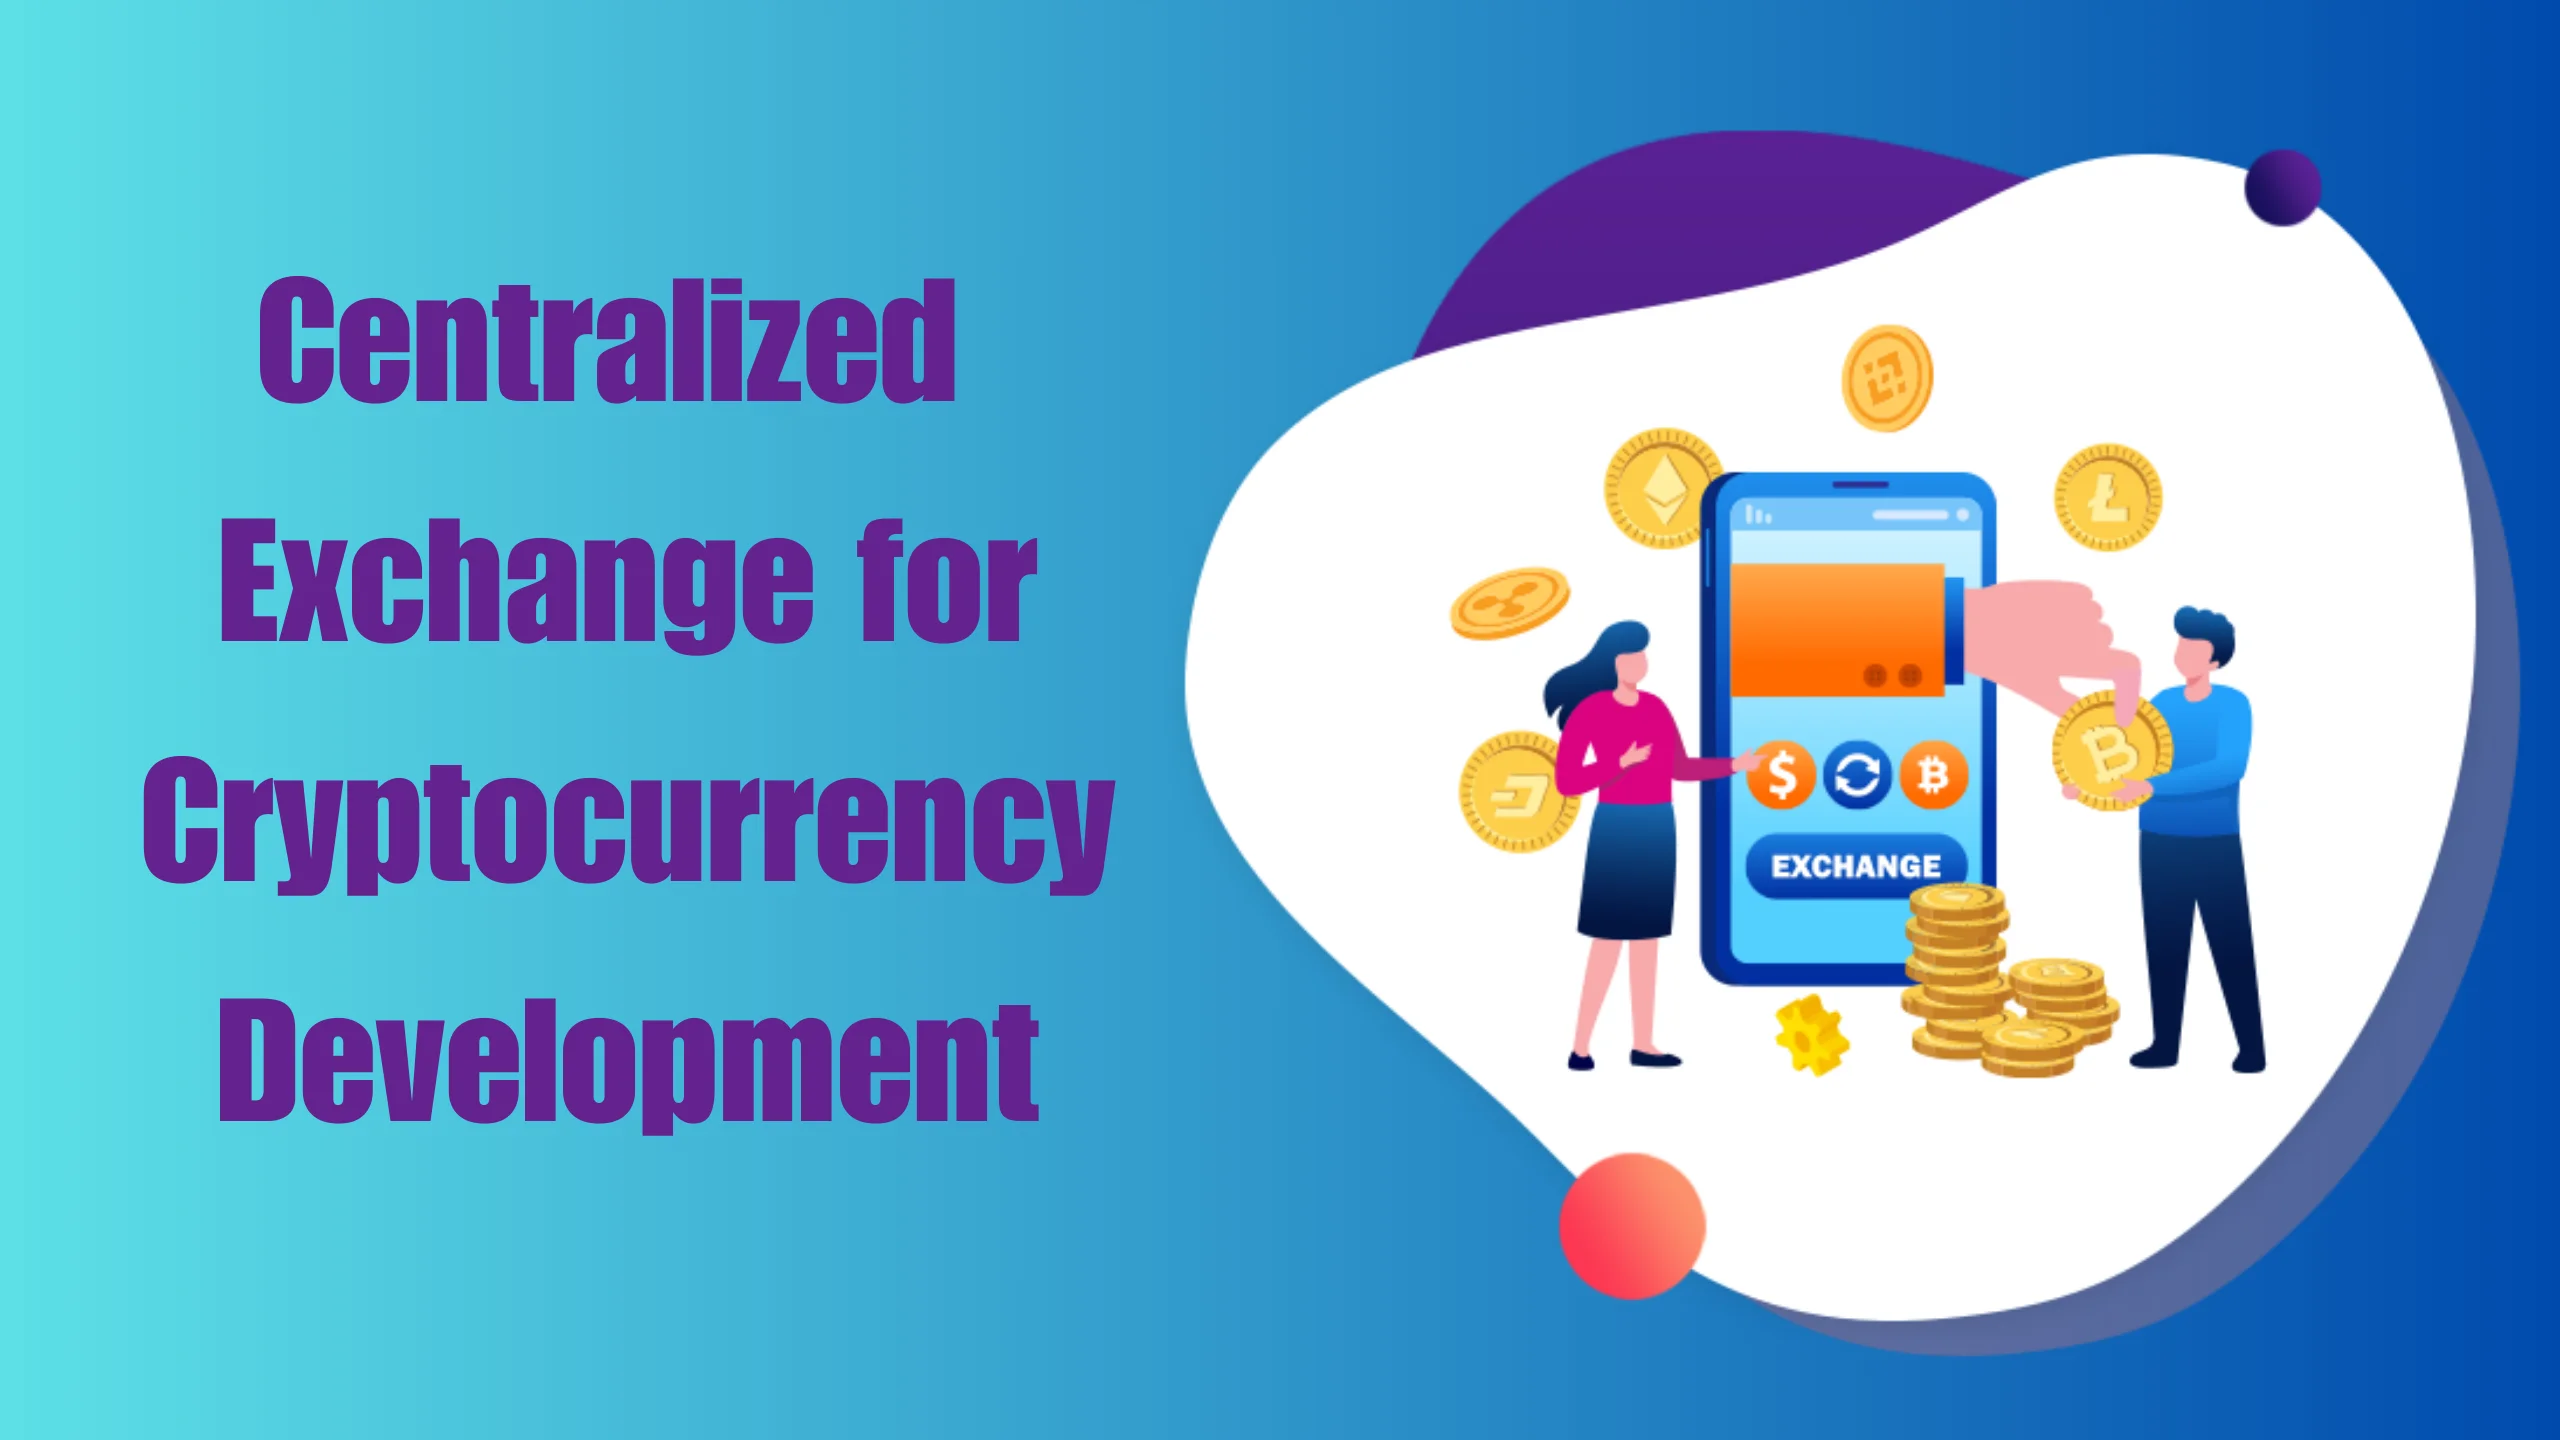 Elements of a centralized exchange for cryptocurrency development inspiration, highlighting key features and design aspects.